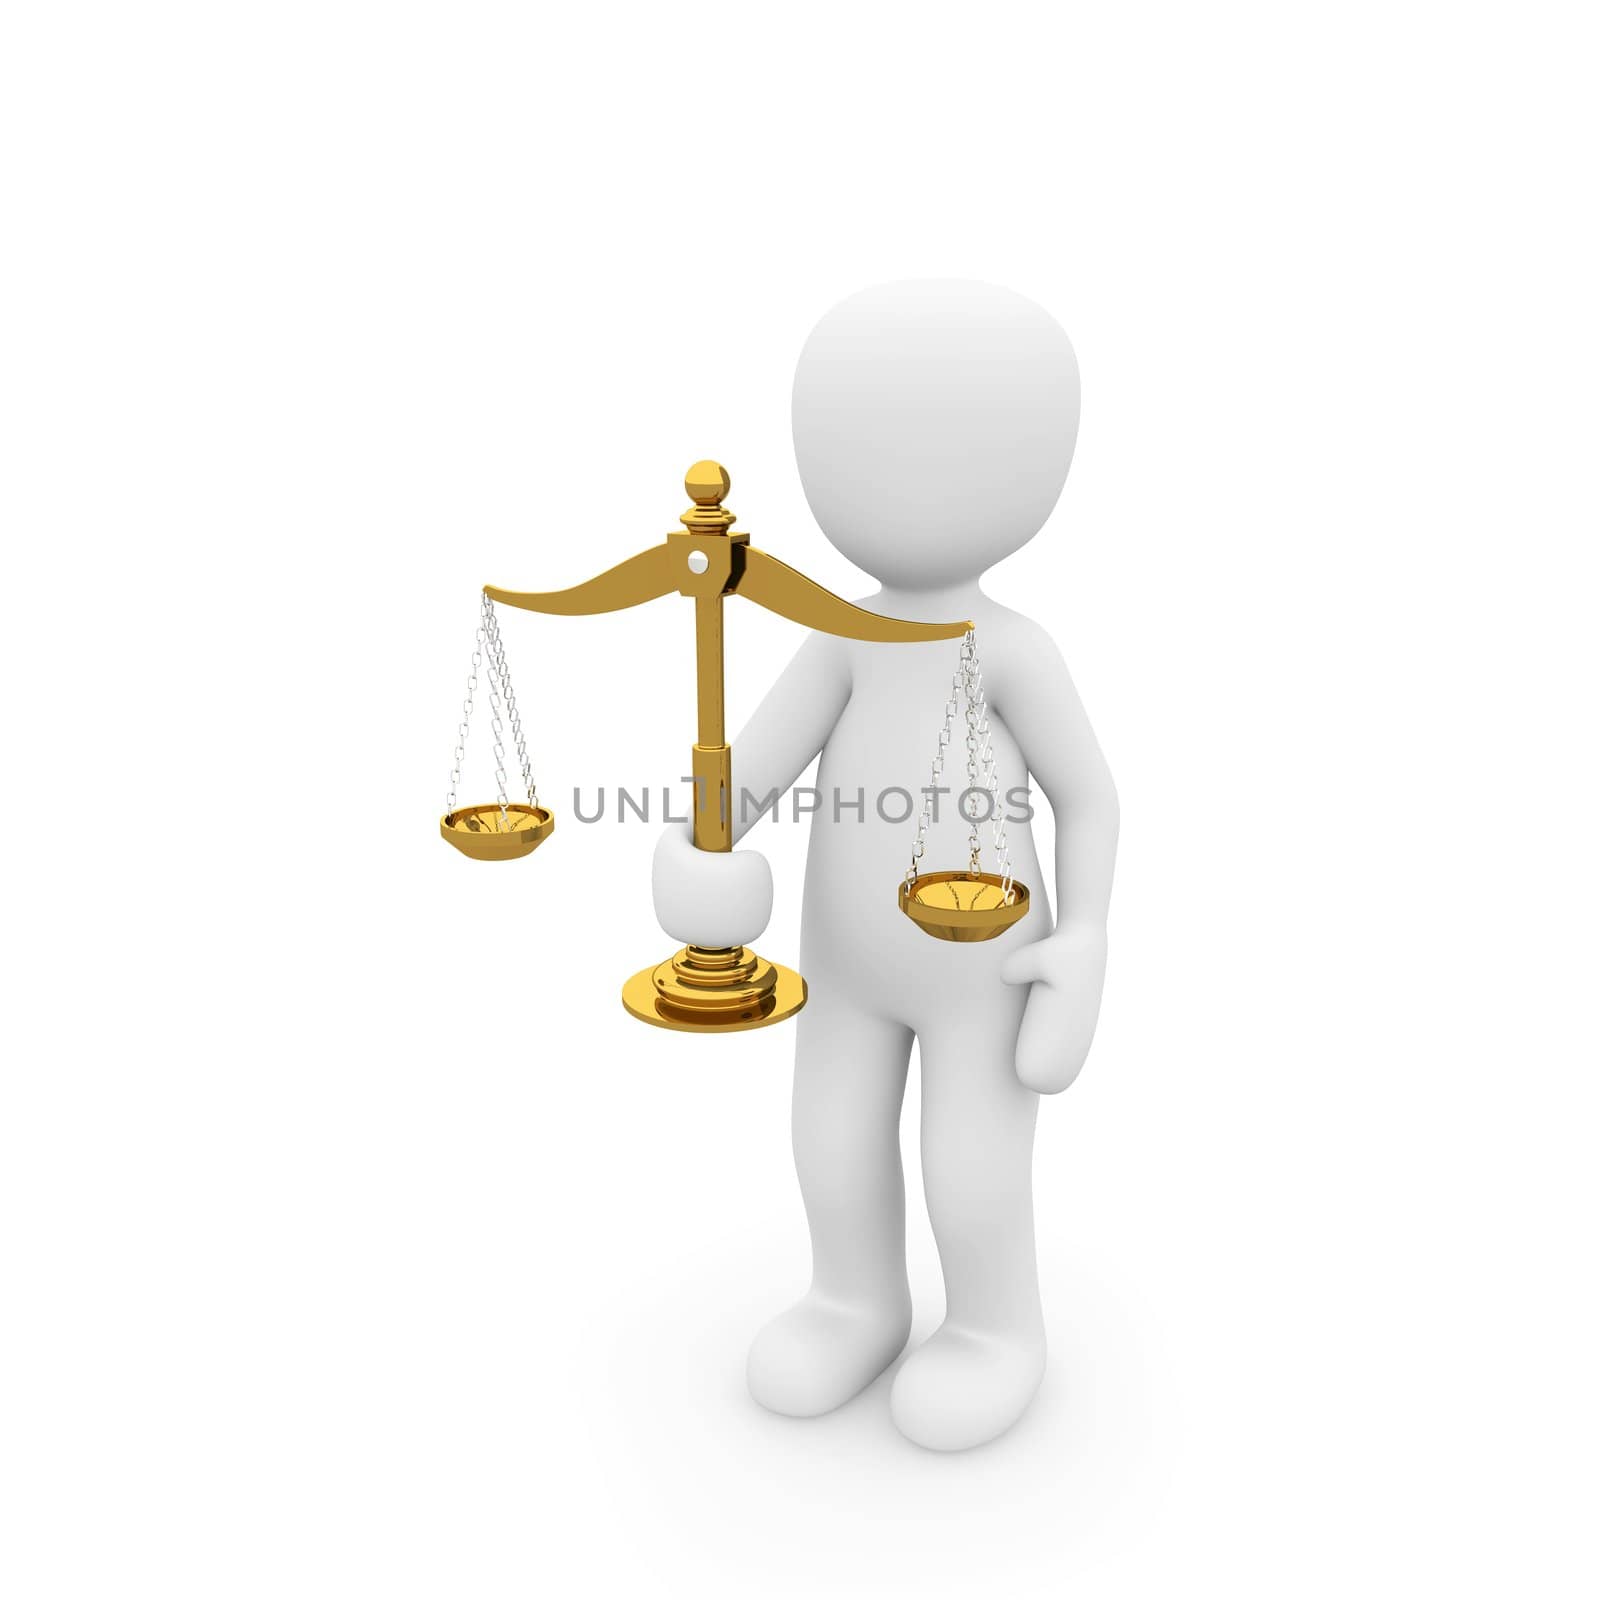 The symbol of justice is justice, and that is represented by a balance of gold. The dignitary is a judge at the district court.